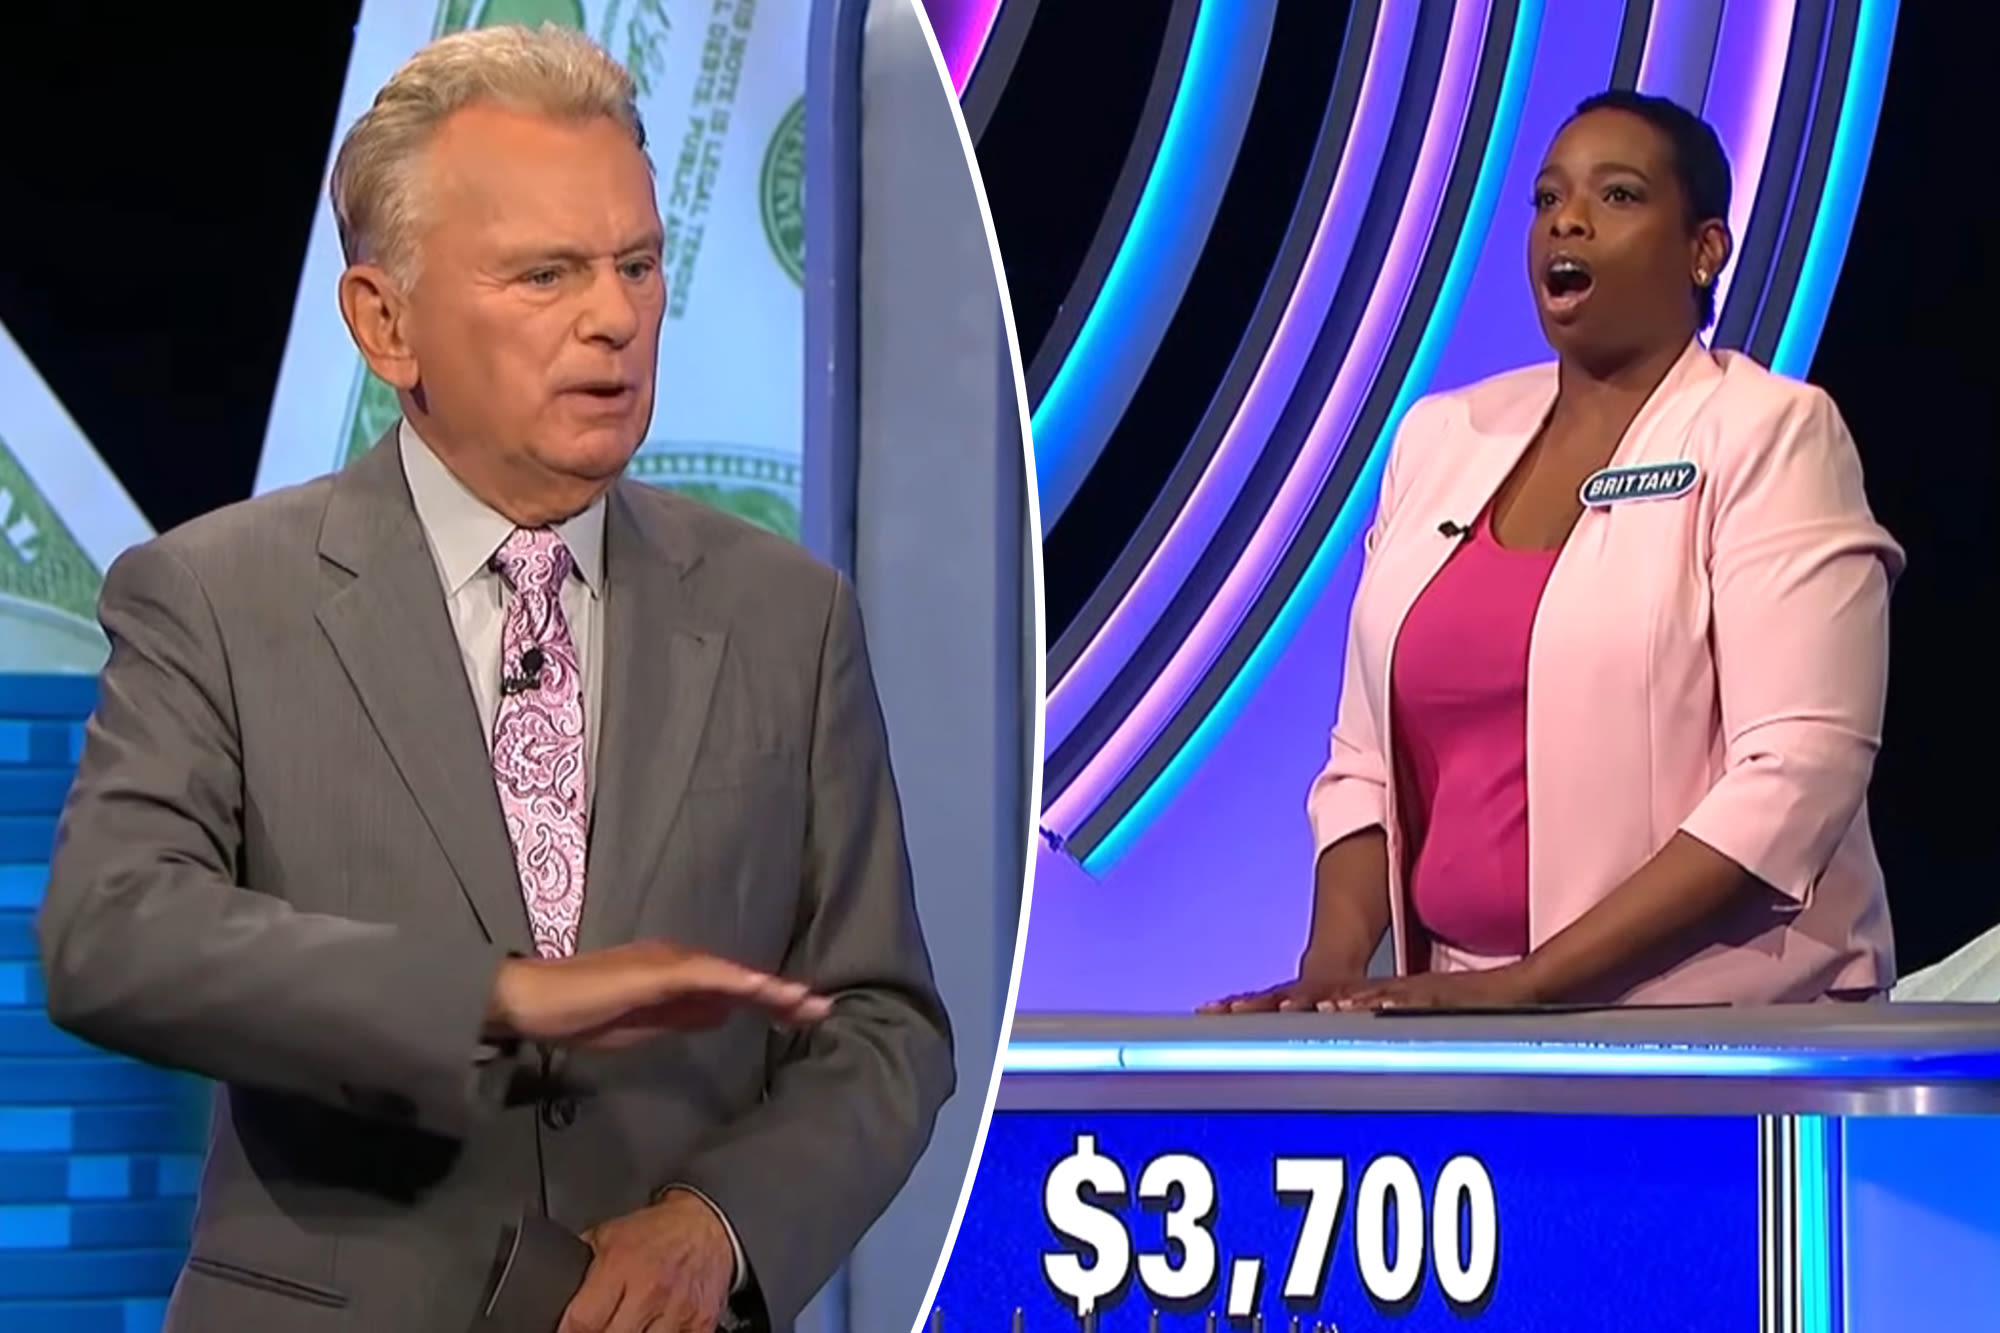 ‘Wheel of Fortune’ host Pat Sajak has shocking reaction when contestant bombs answer